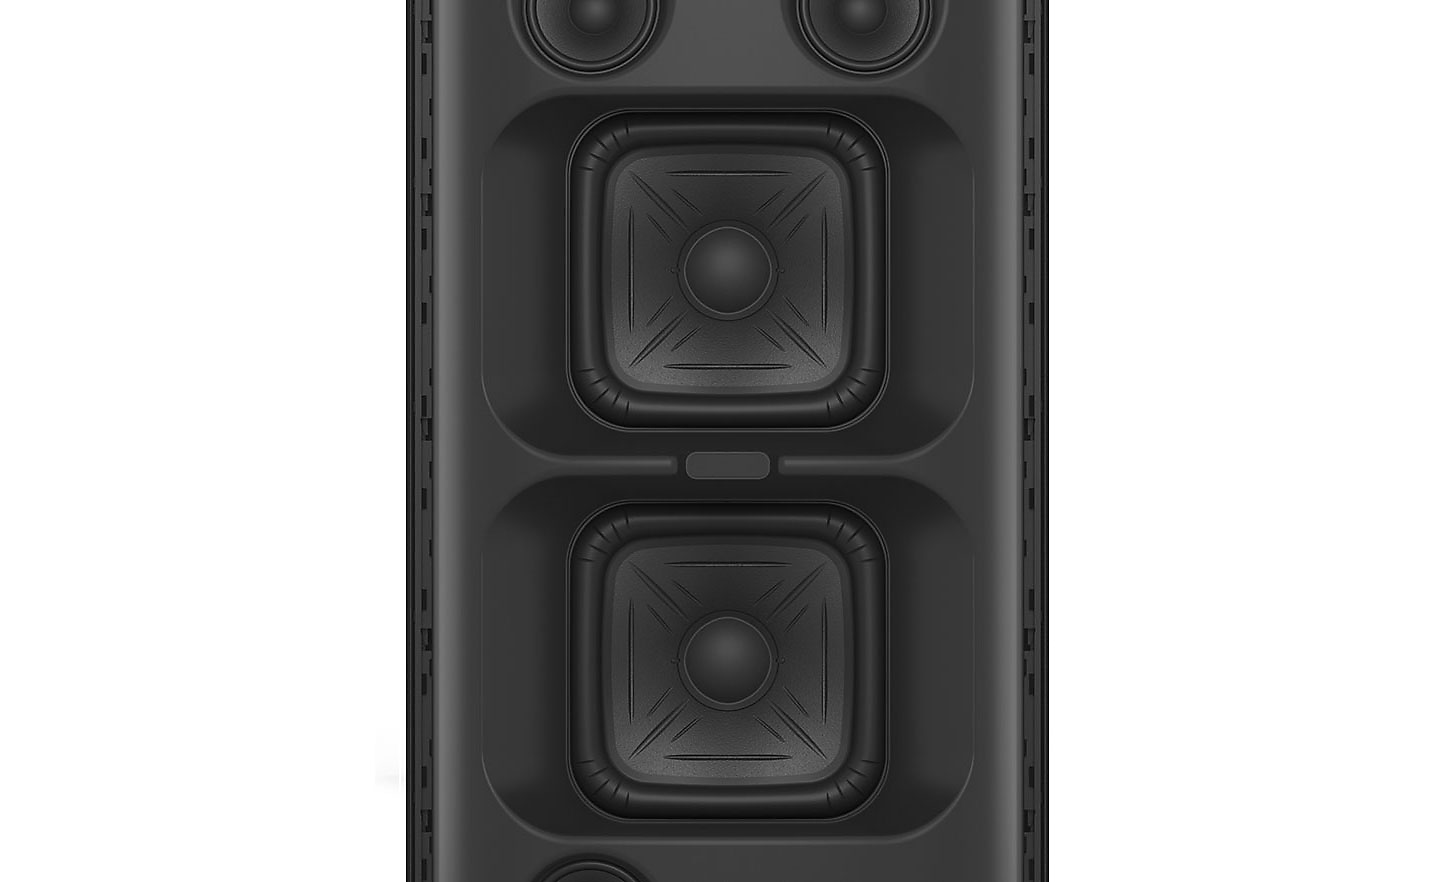 Close up image of the Sony X-Balanced Speaker Unit in an SRS-XV800 speaker